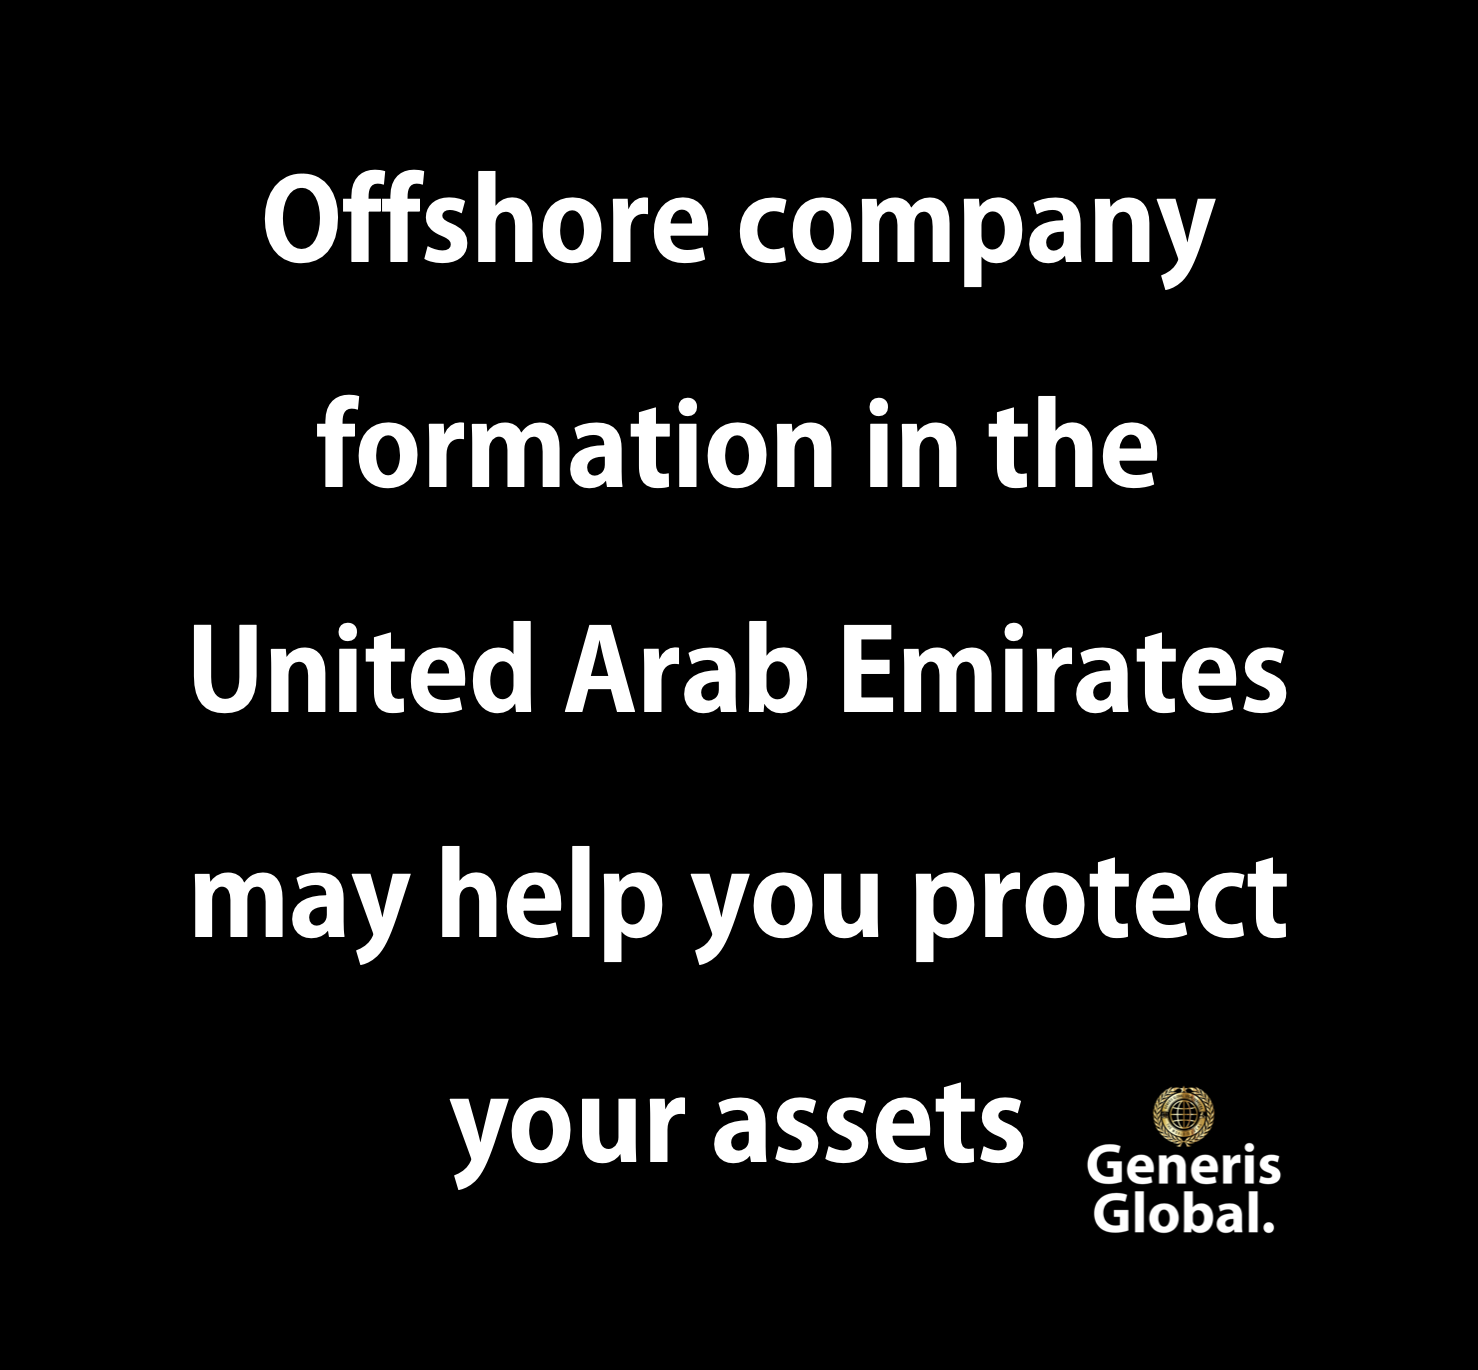 Offshore company formation in the United Arab Emirates